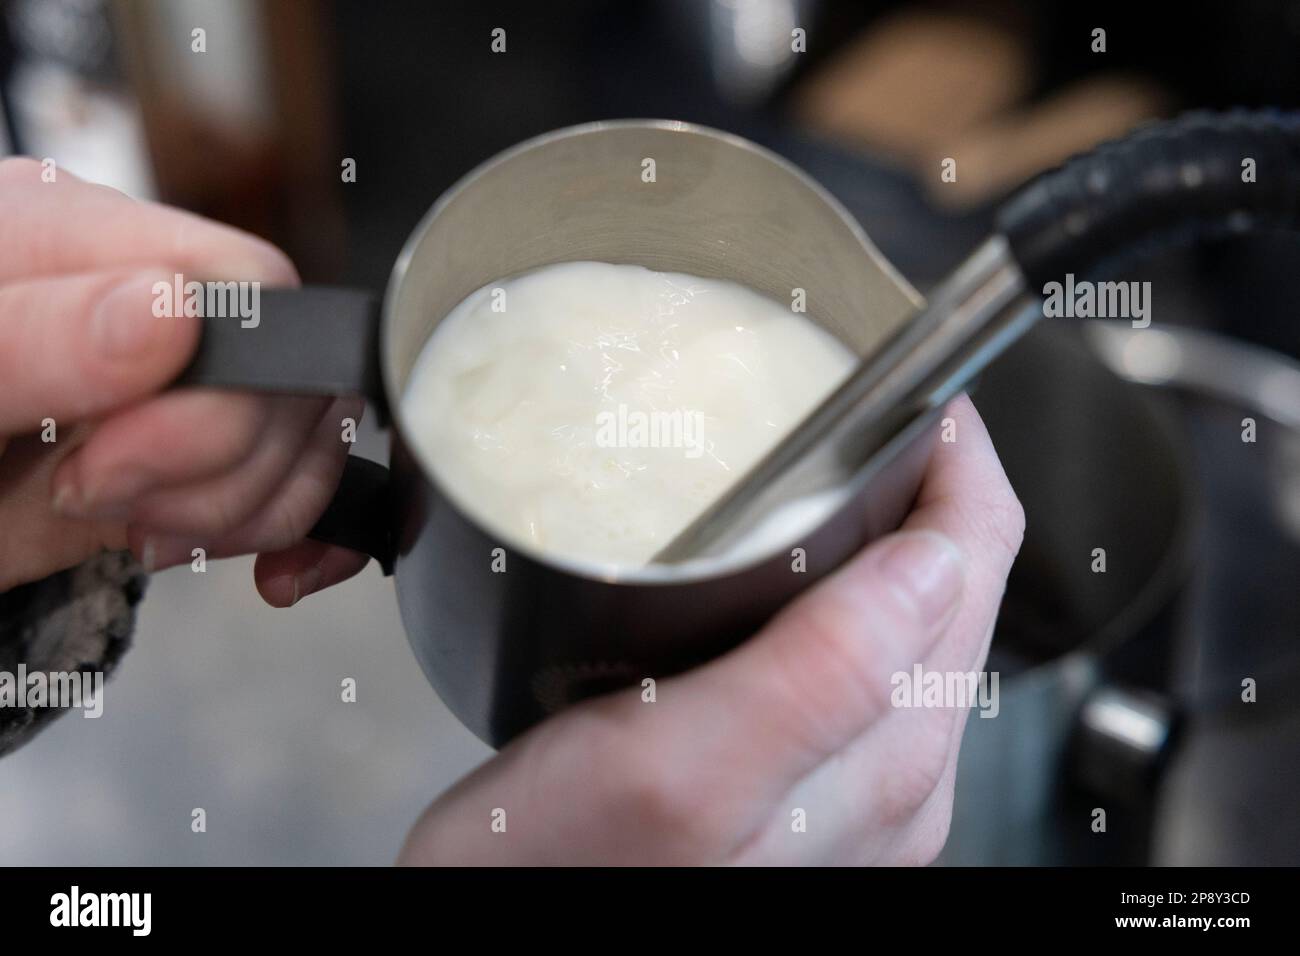 https://c8.alamy.com/comp/2P8Y3CD/milk-in-a-metal-cup-being-frothed-by-an-espresso-machine-steam-wand-2P8Y3CD.jpg